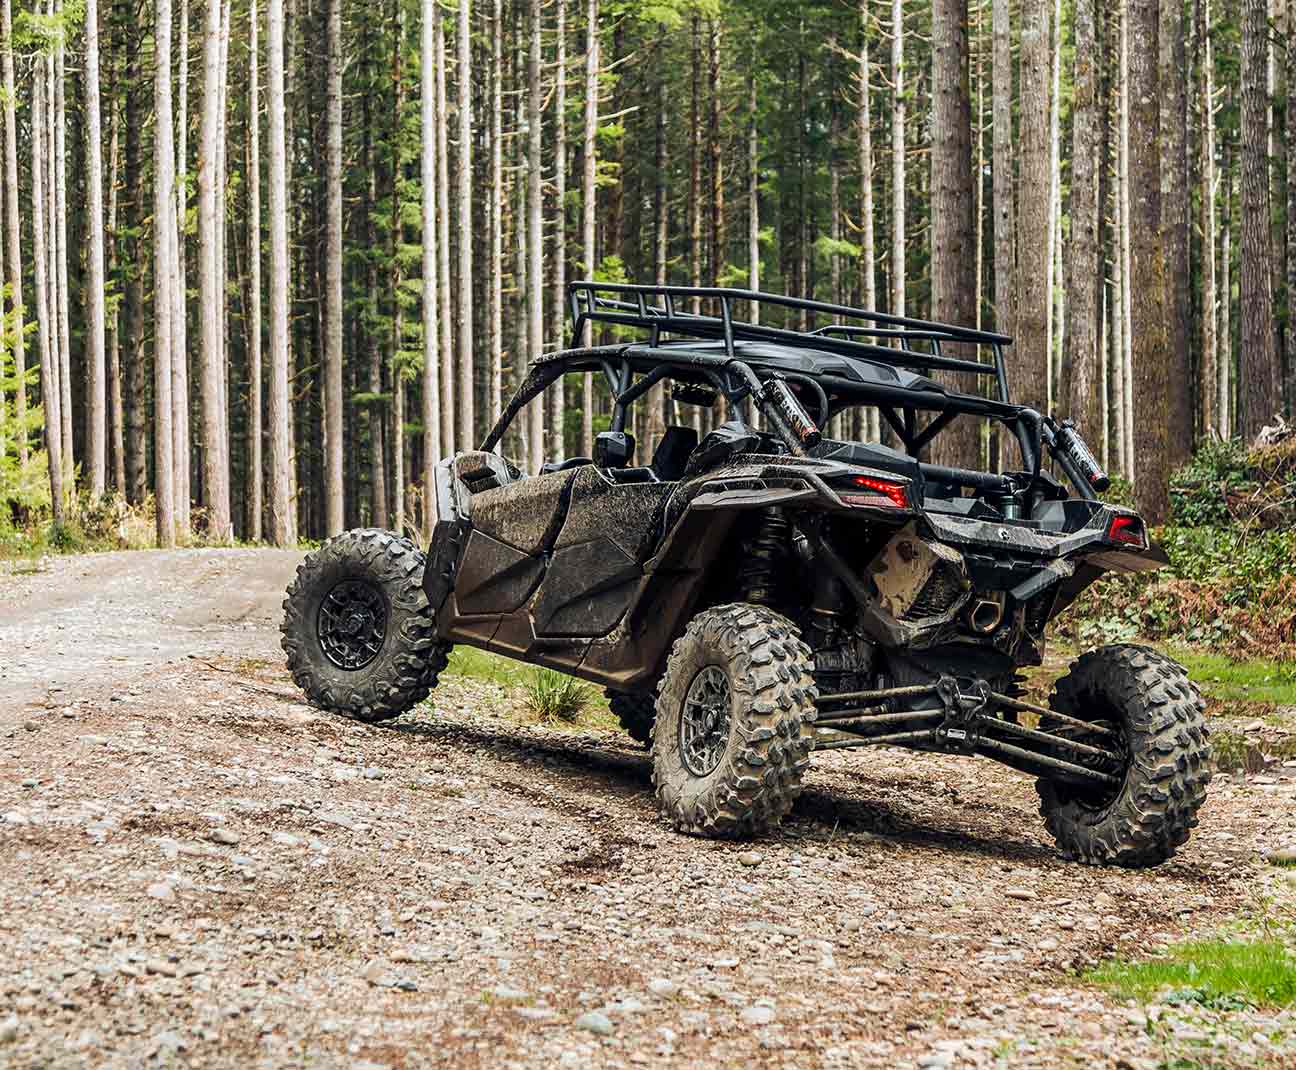 UTV parked in a forest